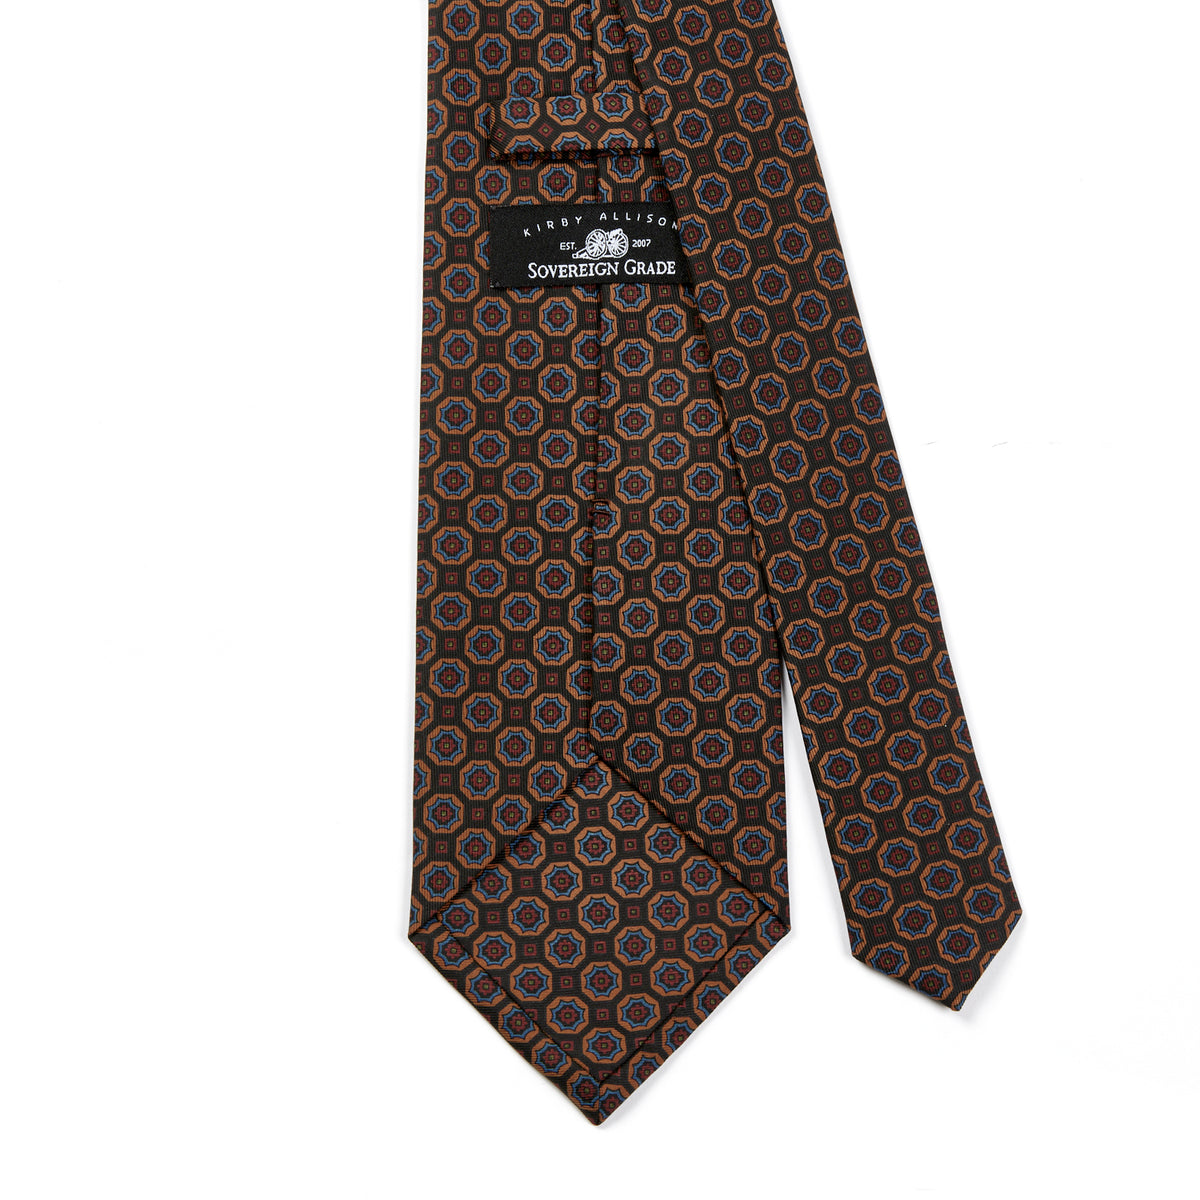 A KirbyAllison.com Sovereign Grade Brown/Tan Floral Medallion Ancient Madder Tie with circles on it.